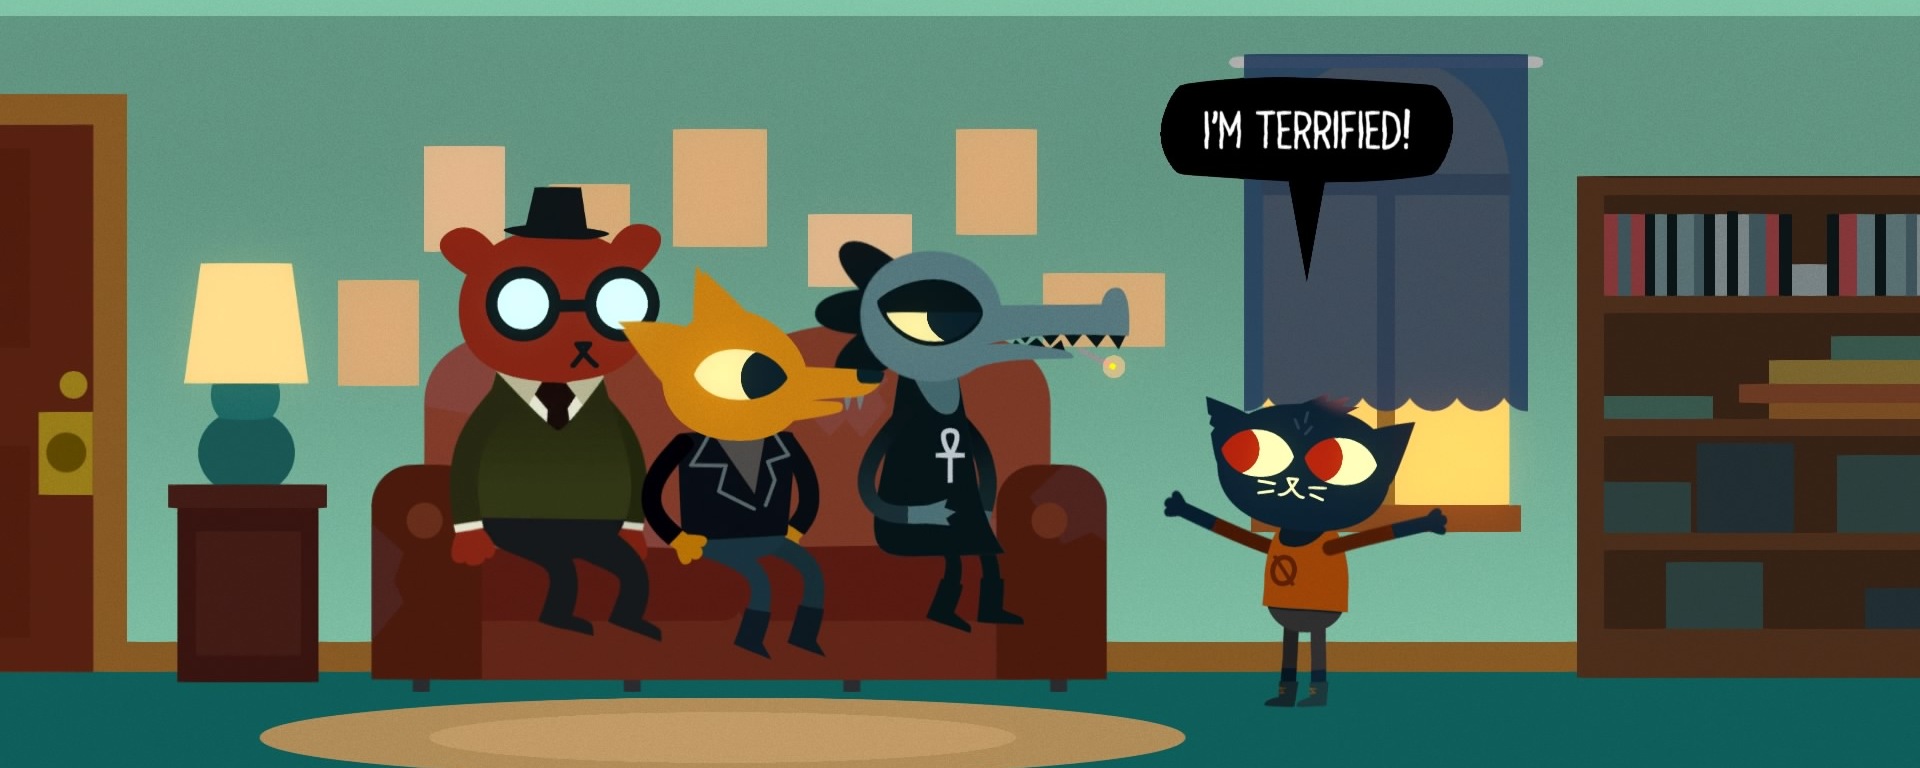 image from night in the woods video game where angus, gregg, and bea are sitting on the couch and mae is standing next to them saying "im terrified"